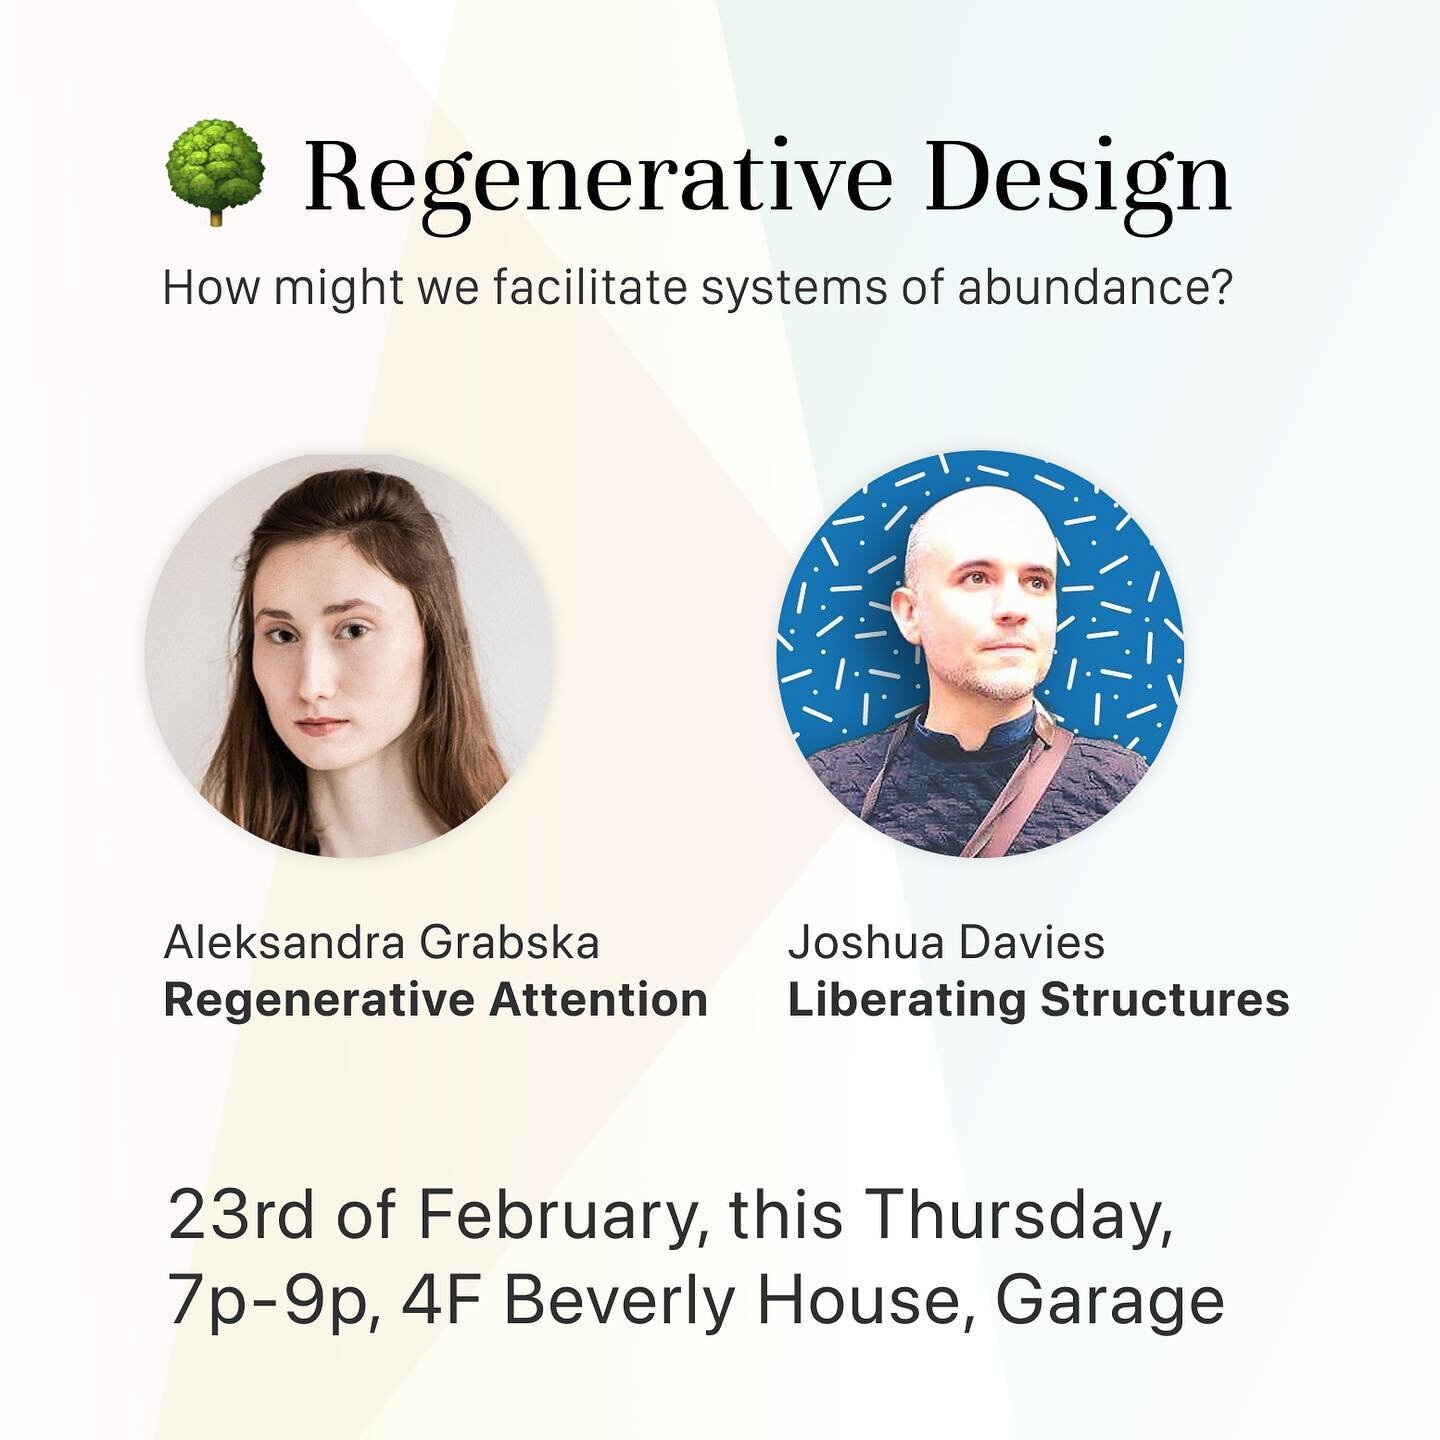 Join us this Thursday to discuss liberating structures with Joshua Davies, the conversational architect, and attention as regenerative practice with Aleksandra Grabska, designer and system thinker.

Regenerative design is a broad topic with many aspe